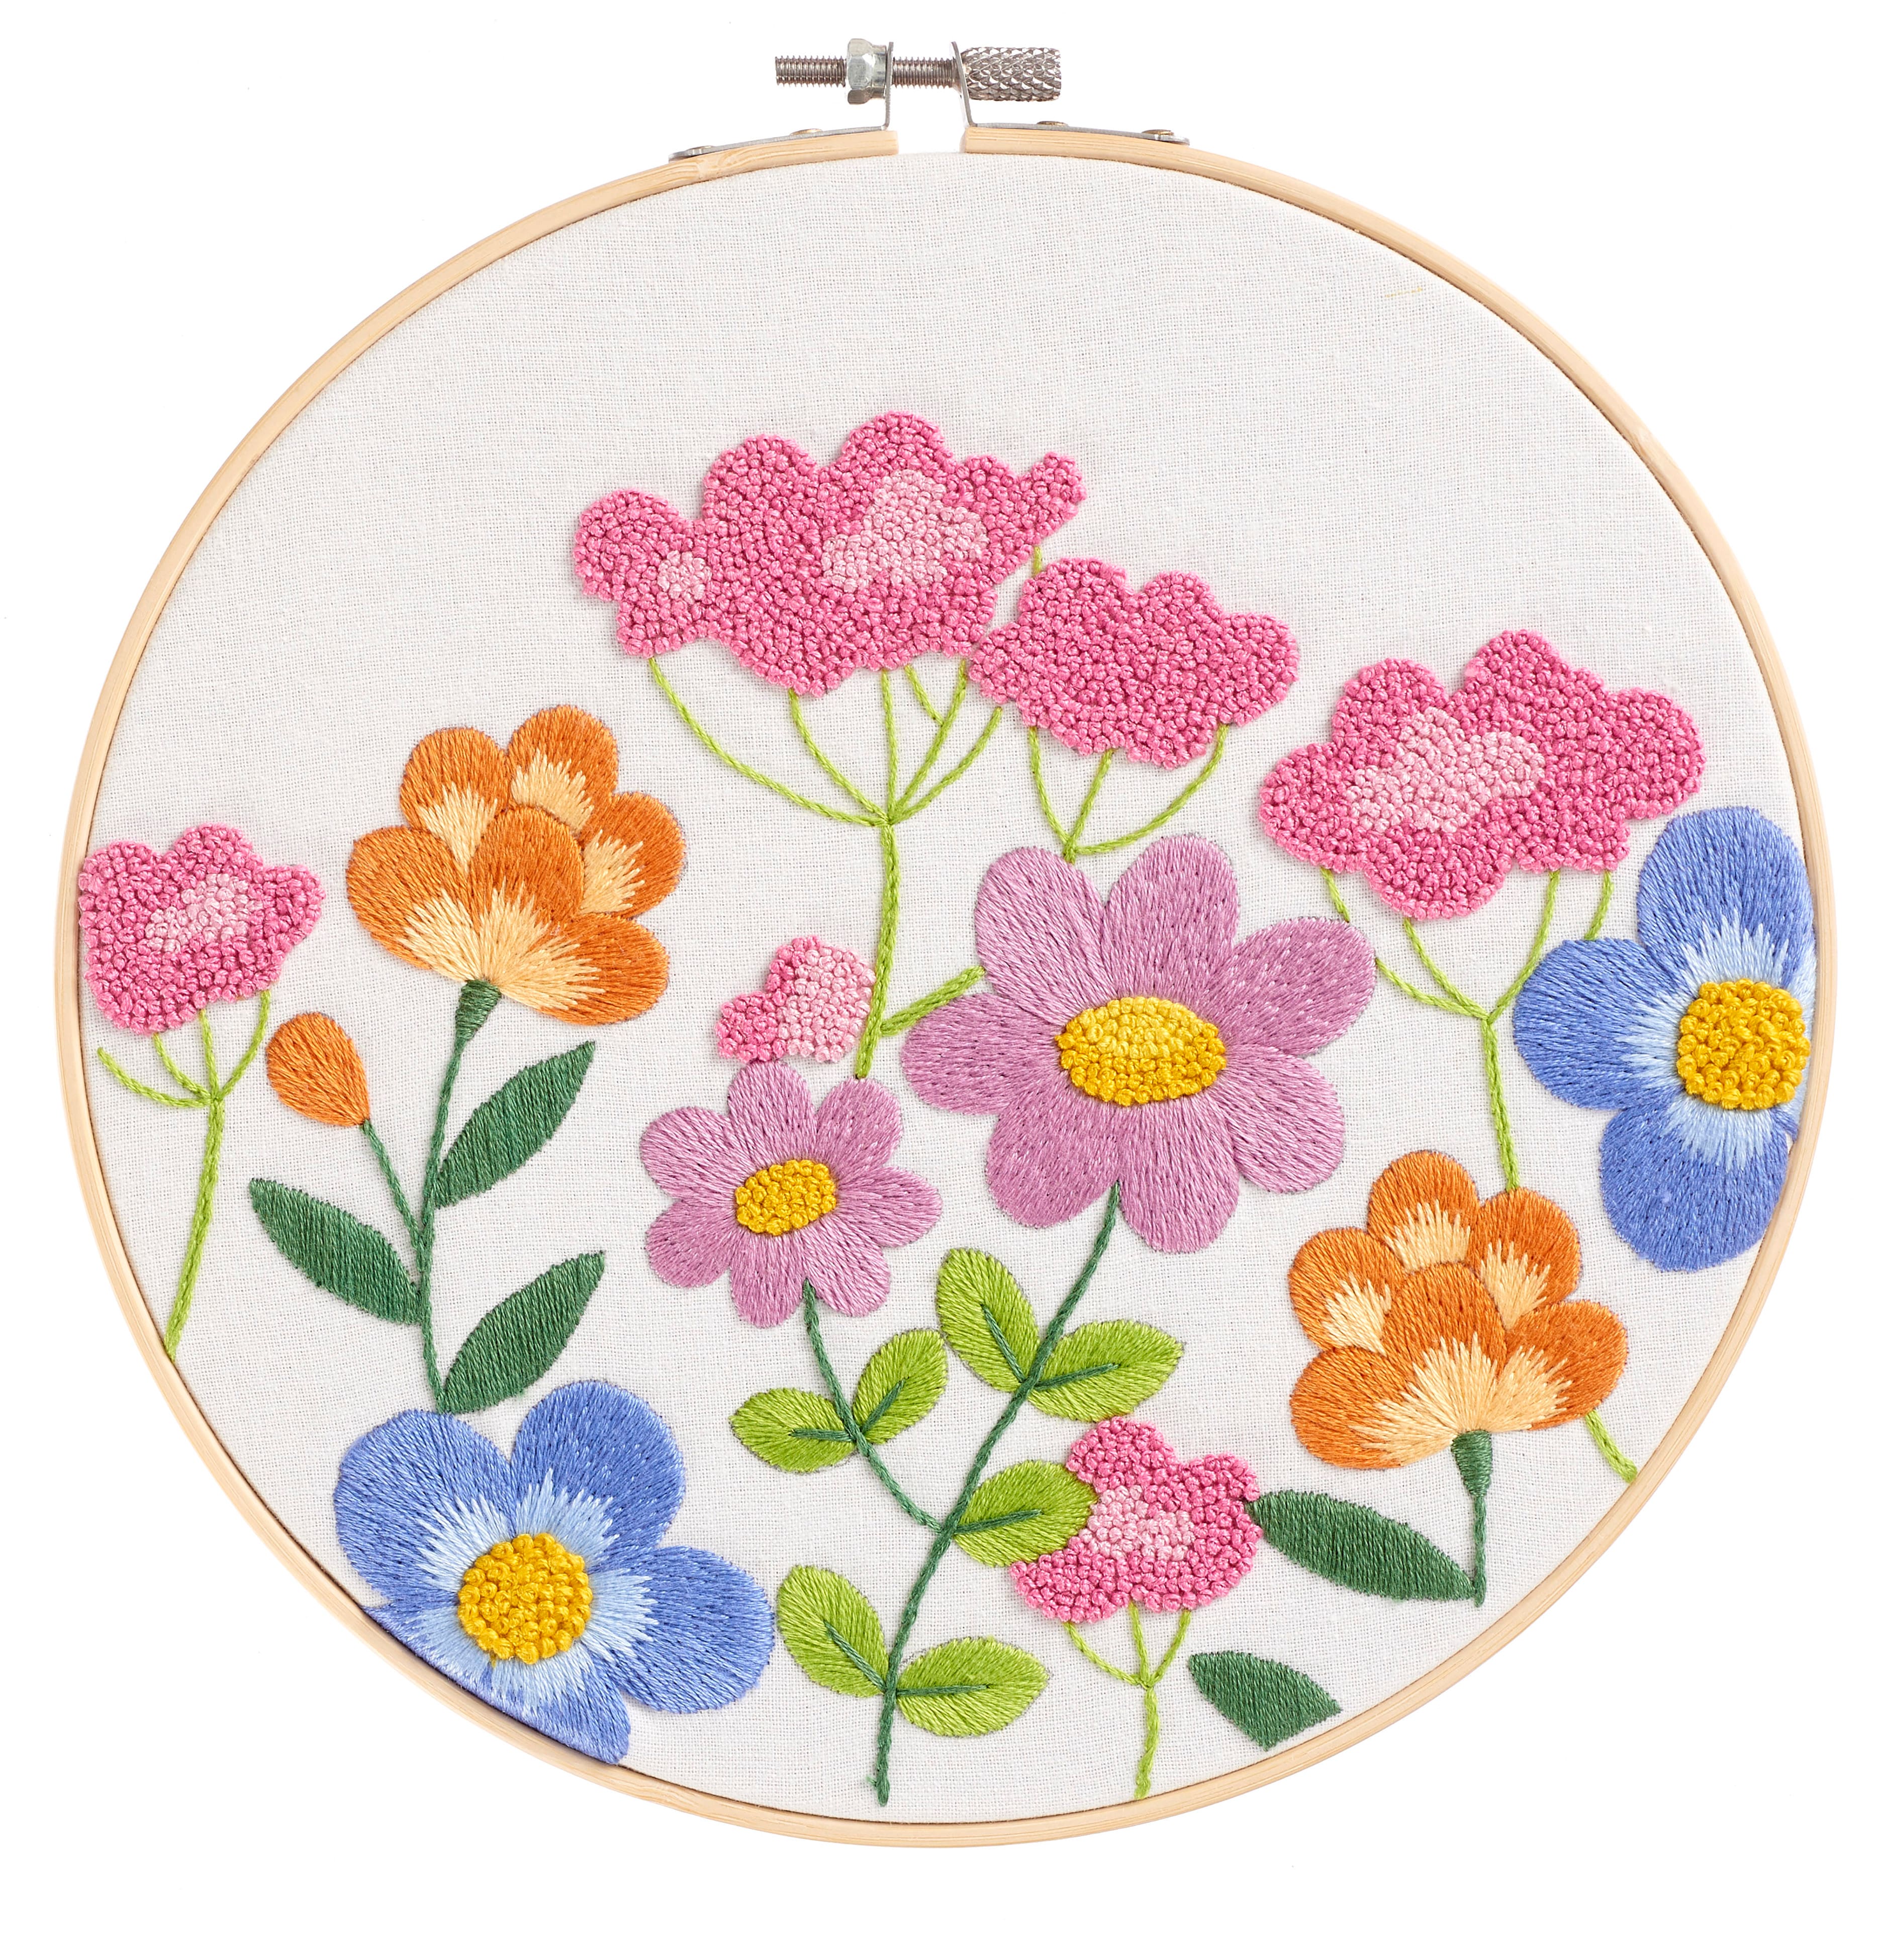 Embroidery Kits For Adults For Beginners (Under $10)